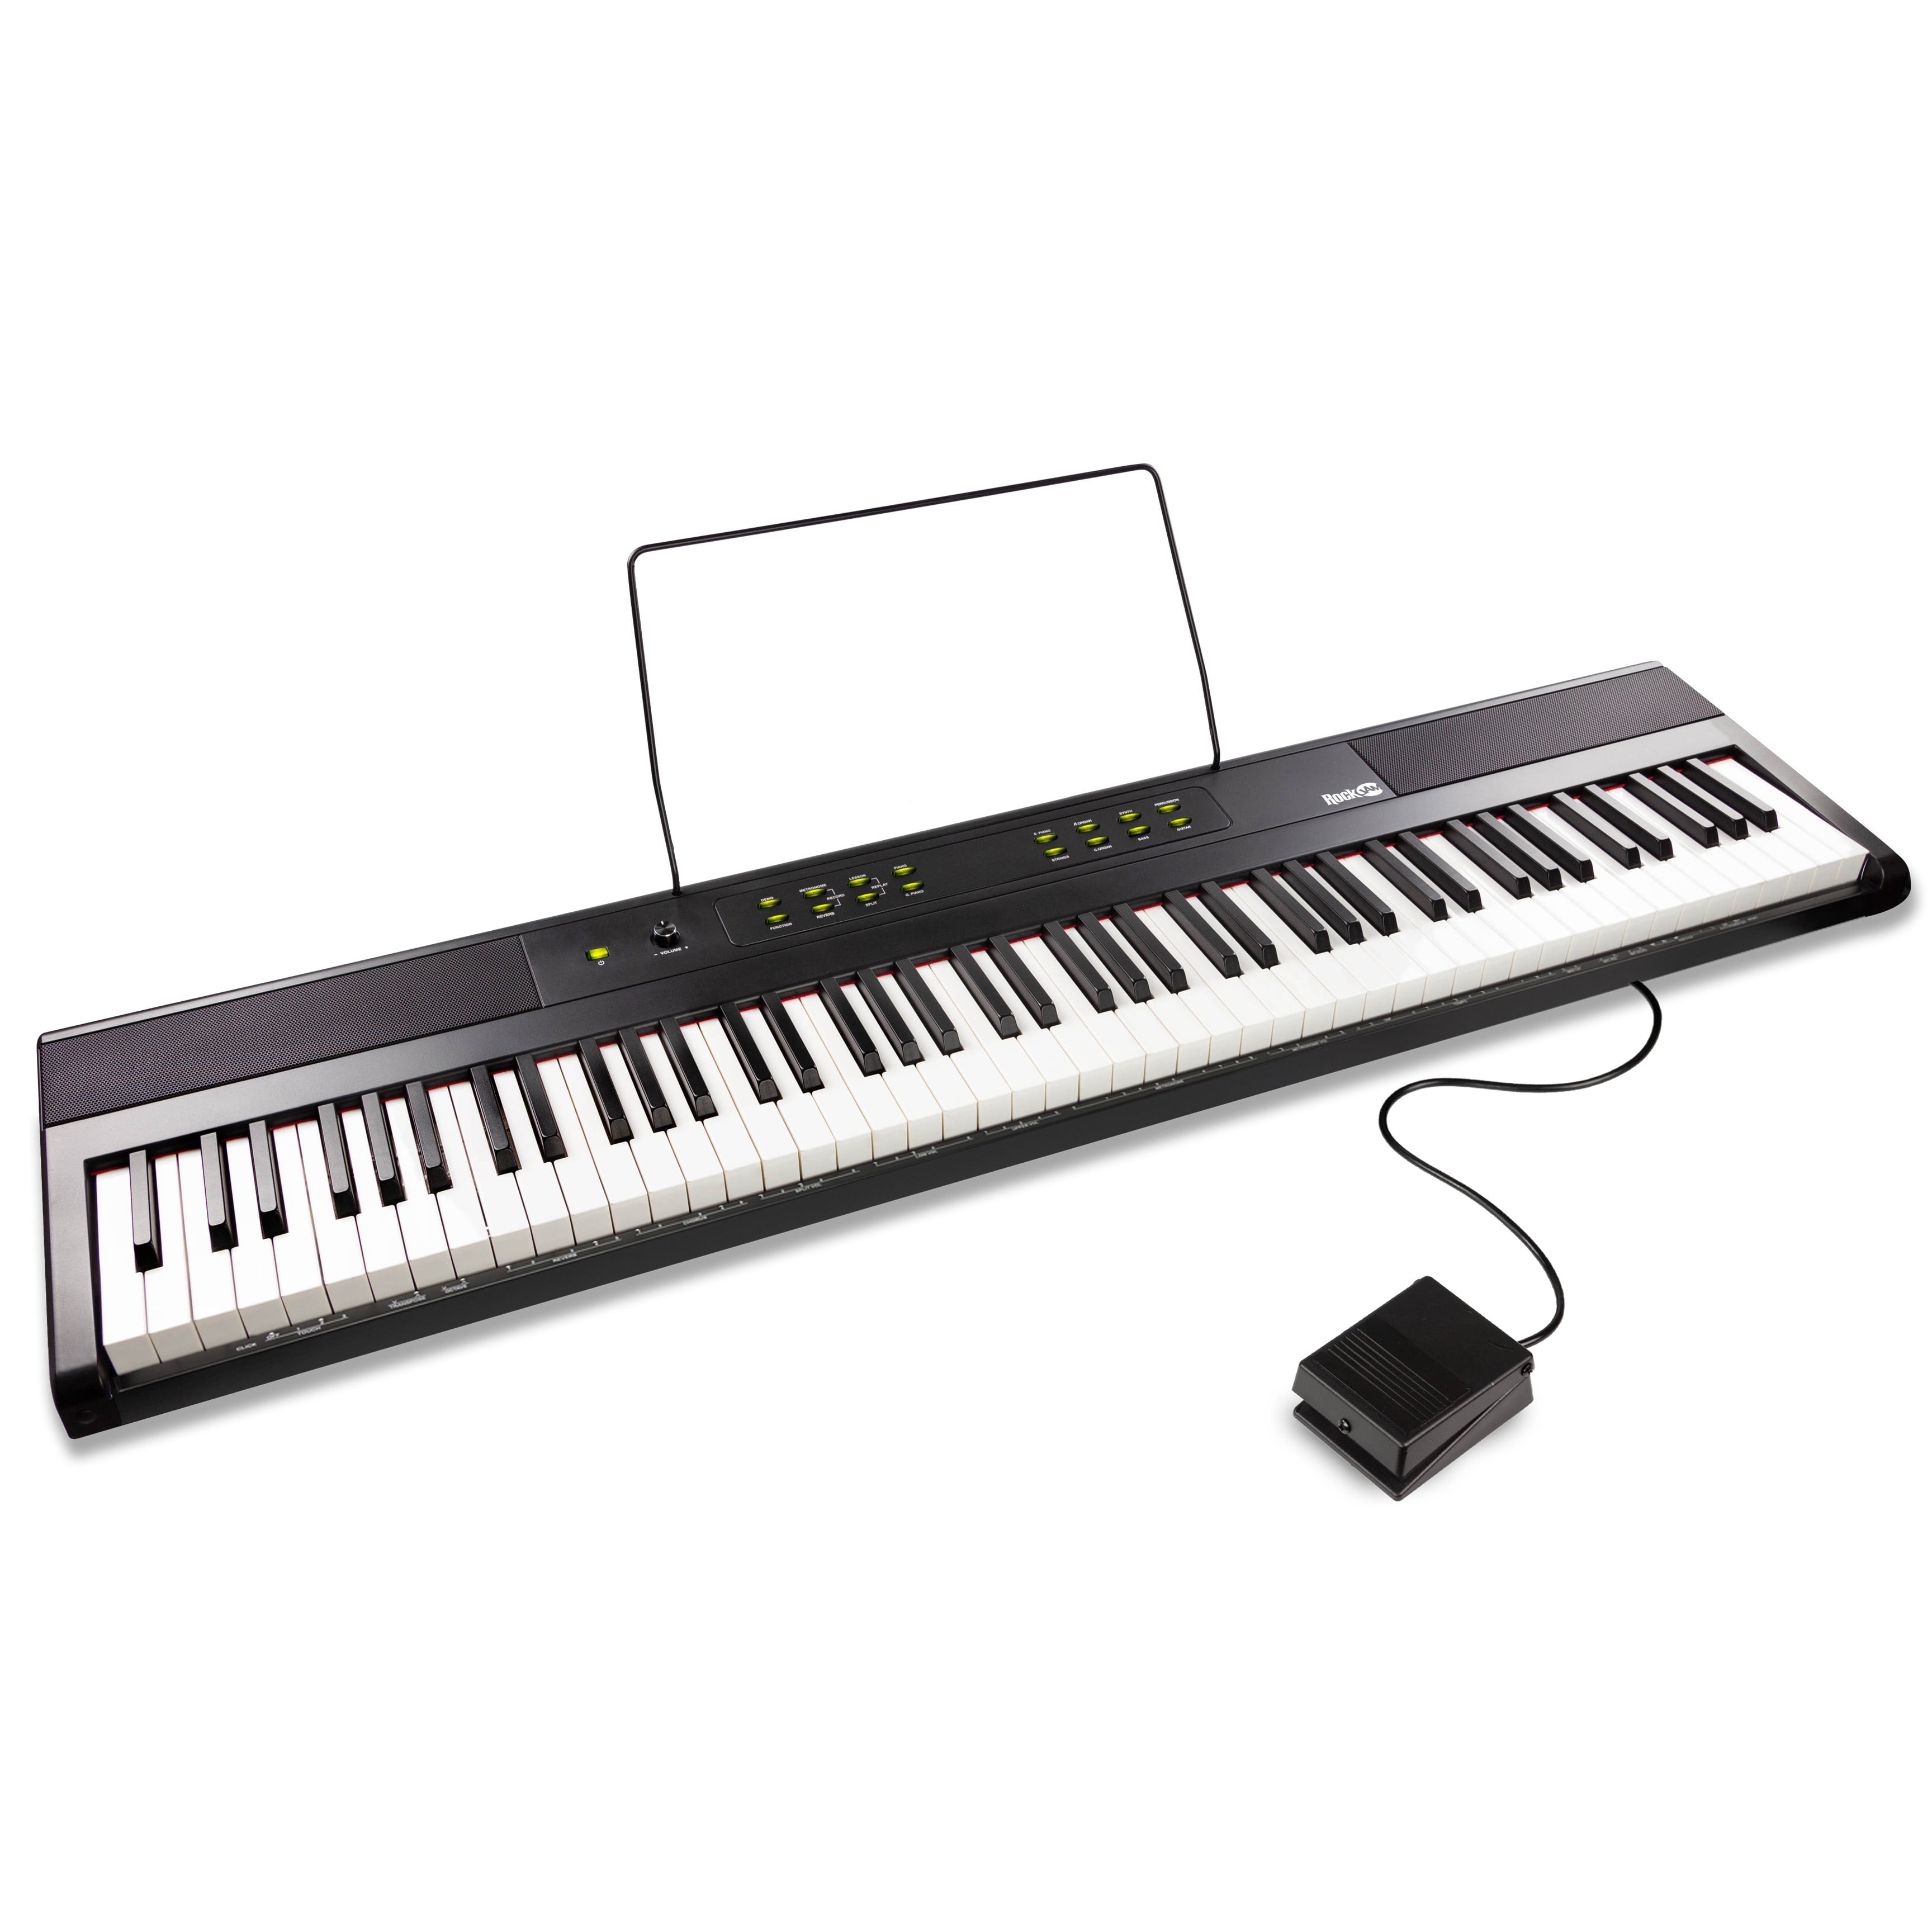  RockJam Compact 61 Key Keyboard with Sheet Music Stand, Power  Supply, Piano Note Stickers & Simply Piano Lessons and Casio ARST Single-X  Adjustable Keyboard Stand, Black : Musical Instruments